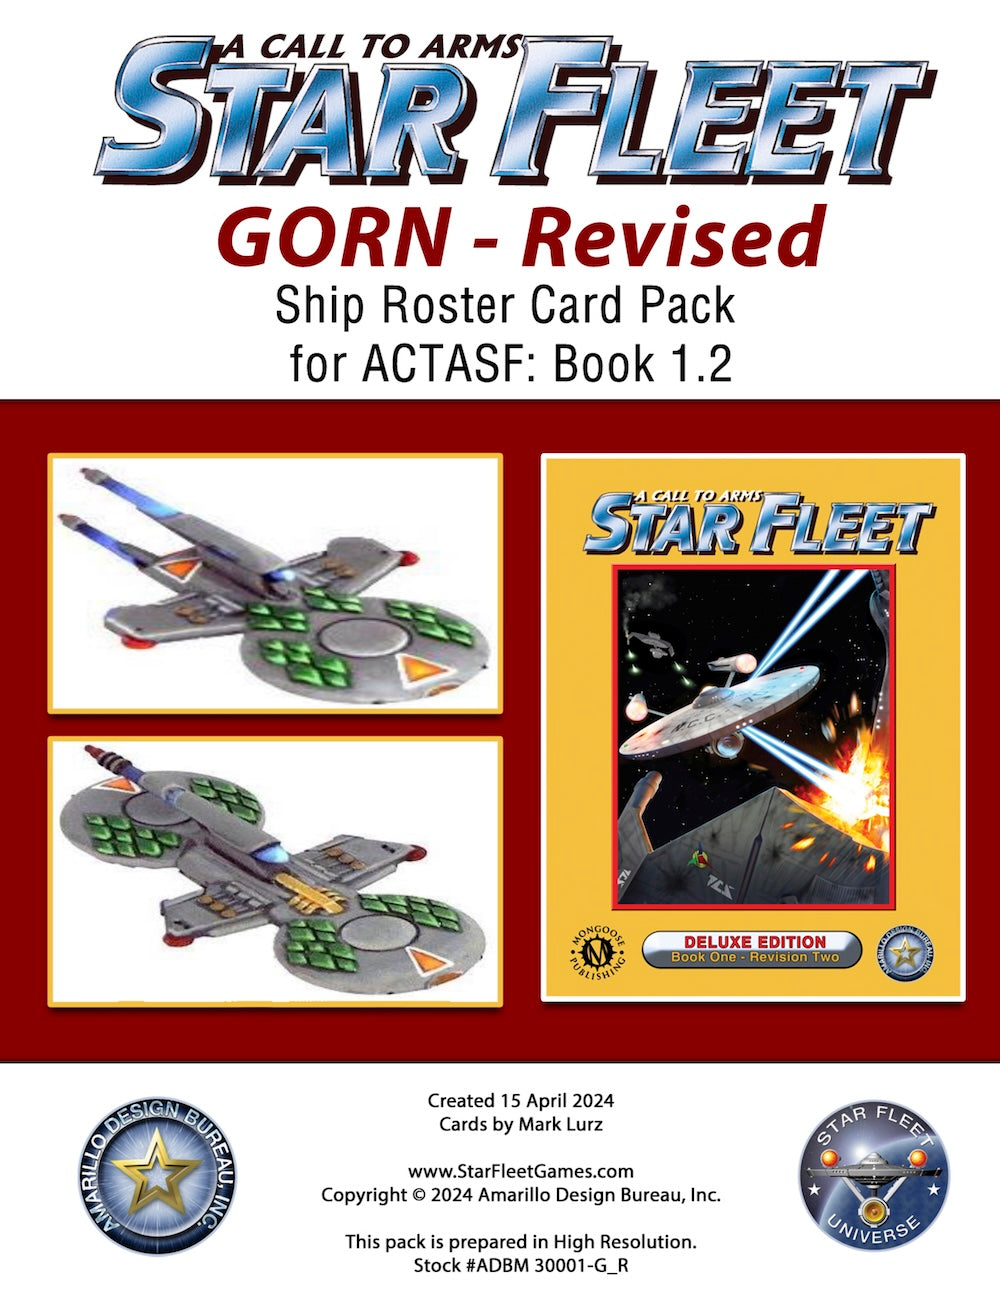 A Call to Arms: Star Fleet, Book 1.2: Gorn Ship Roster Card Pack Revised